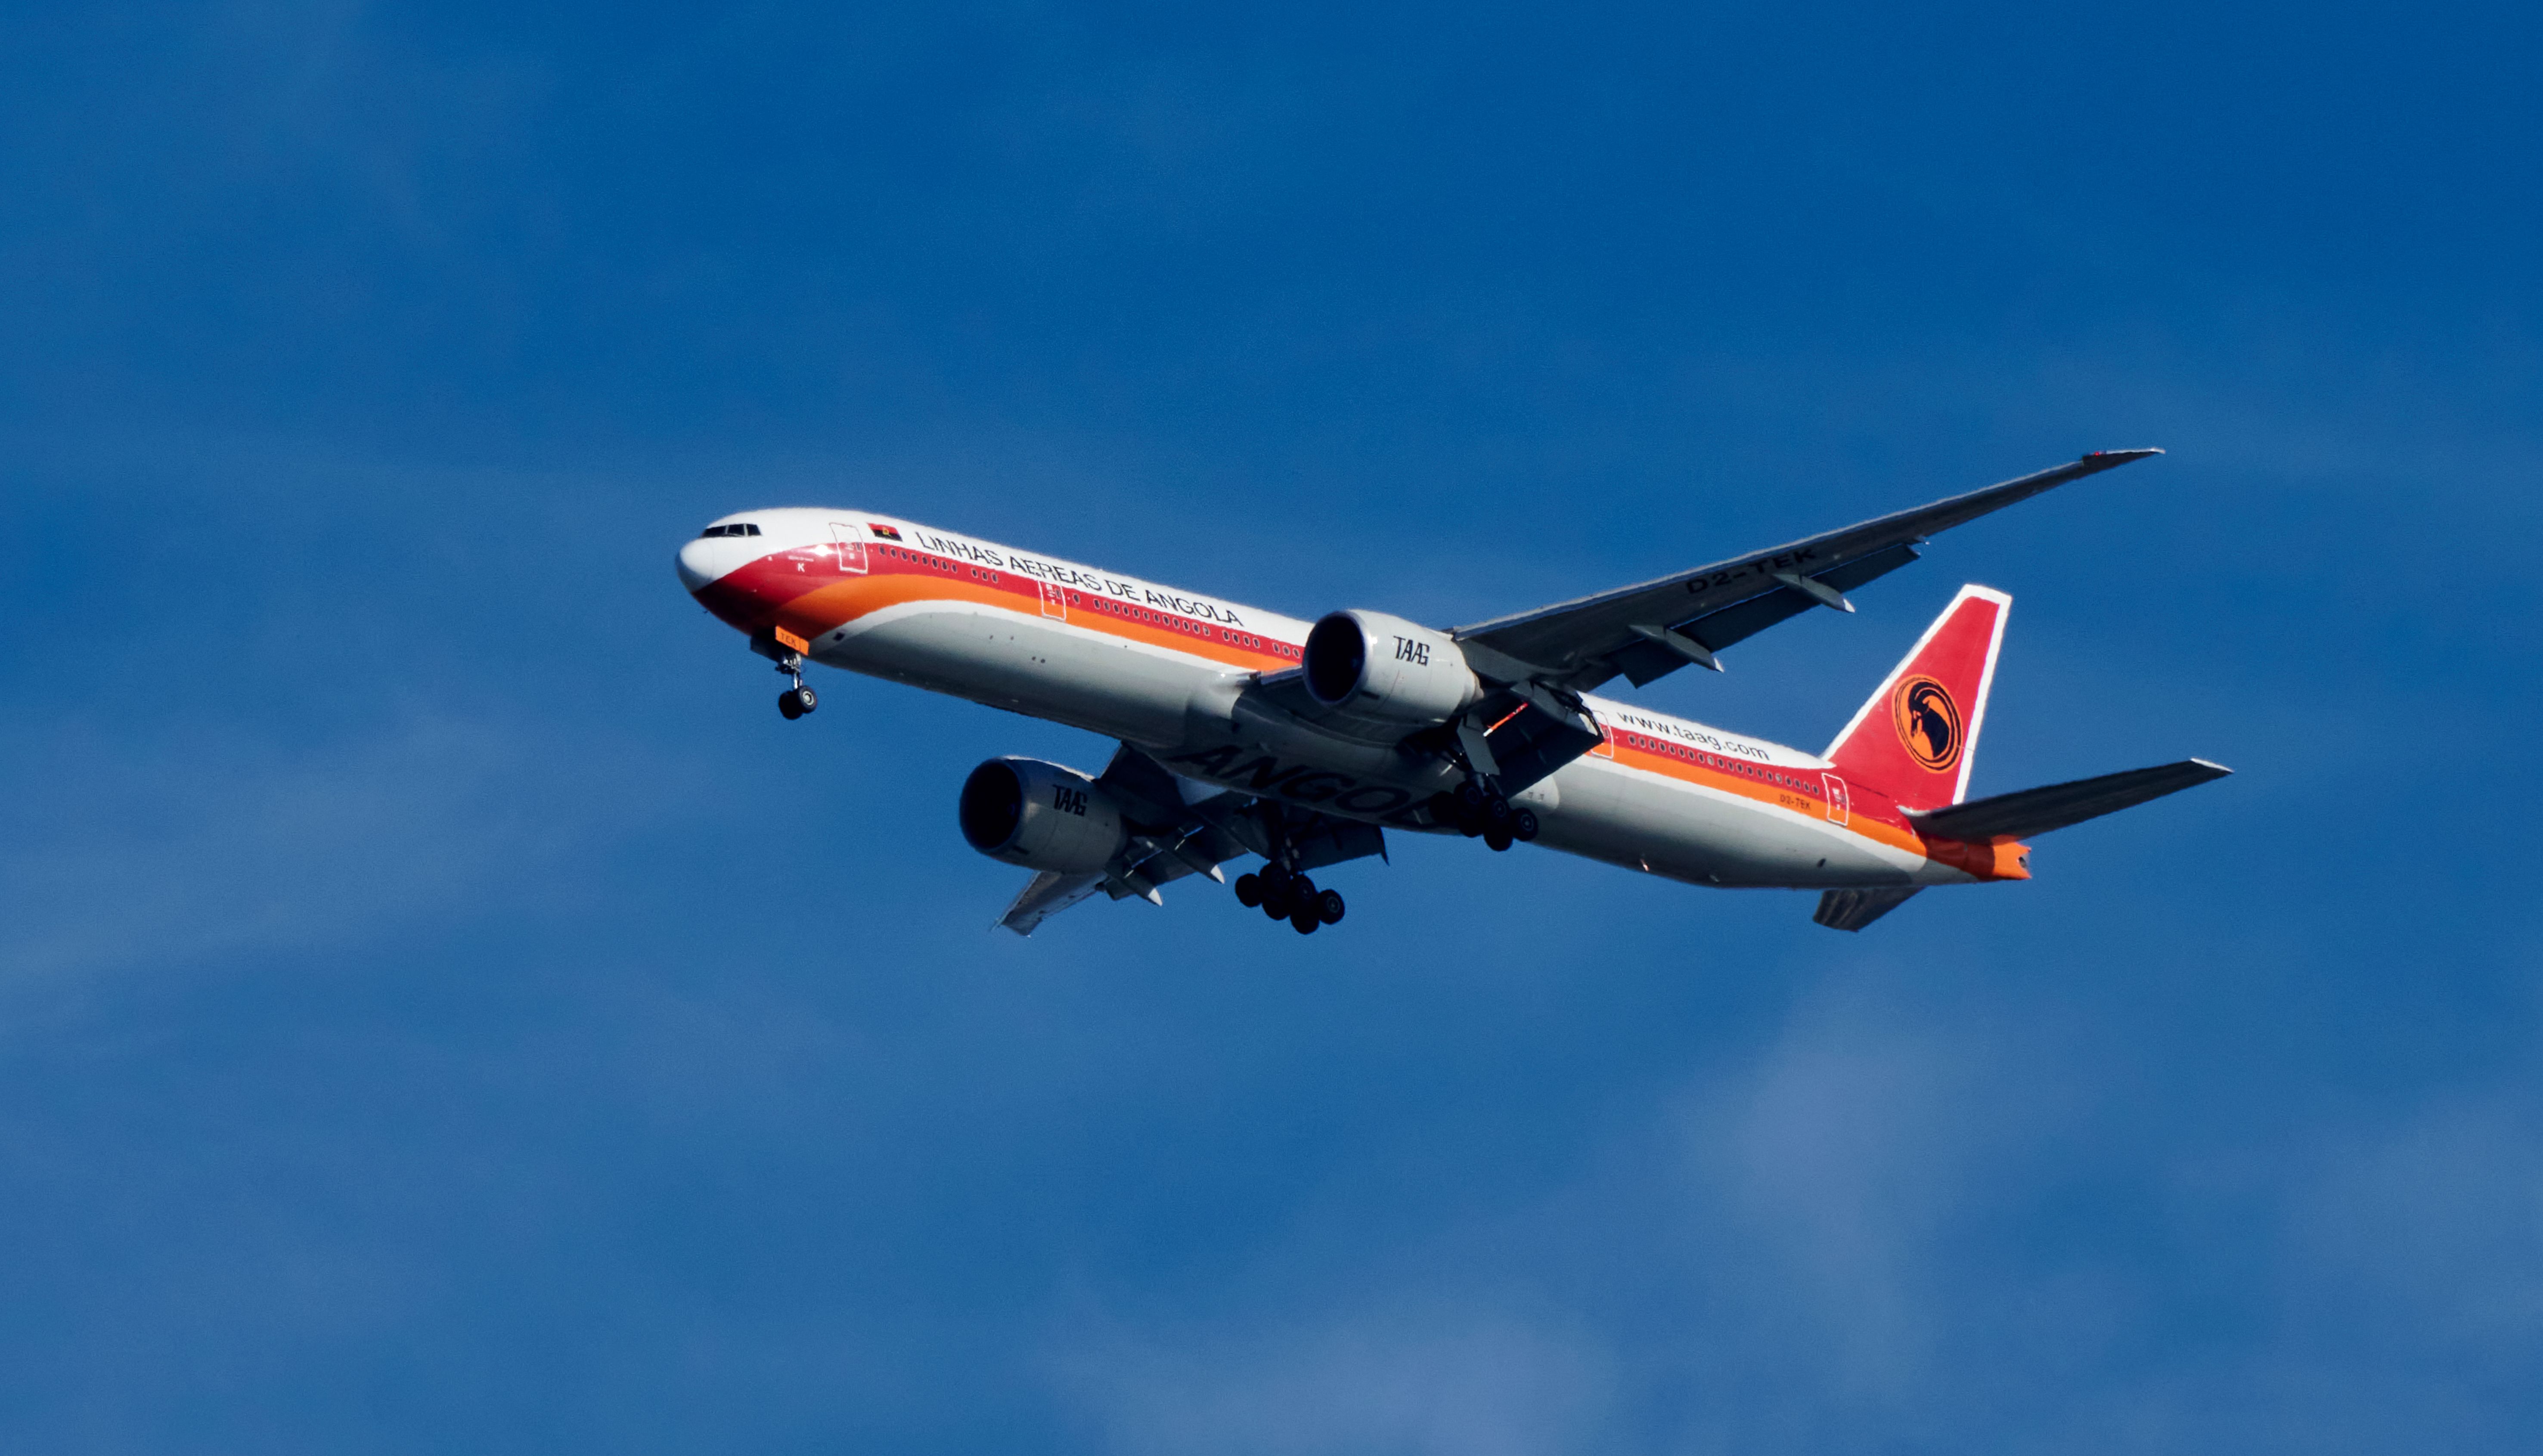 TAAG Angola Airlines Boeing 777 aircraft flies over the Tagus River 